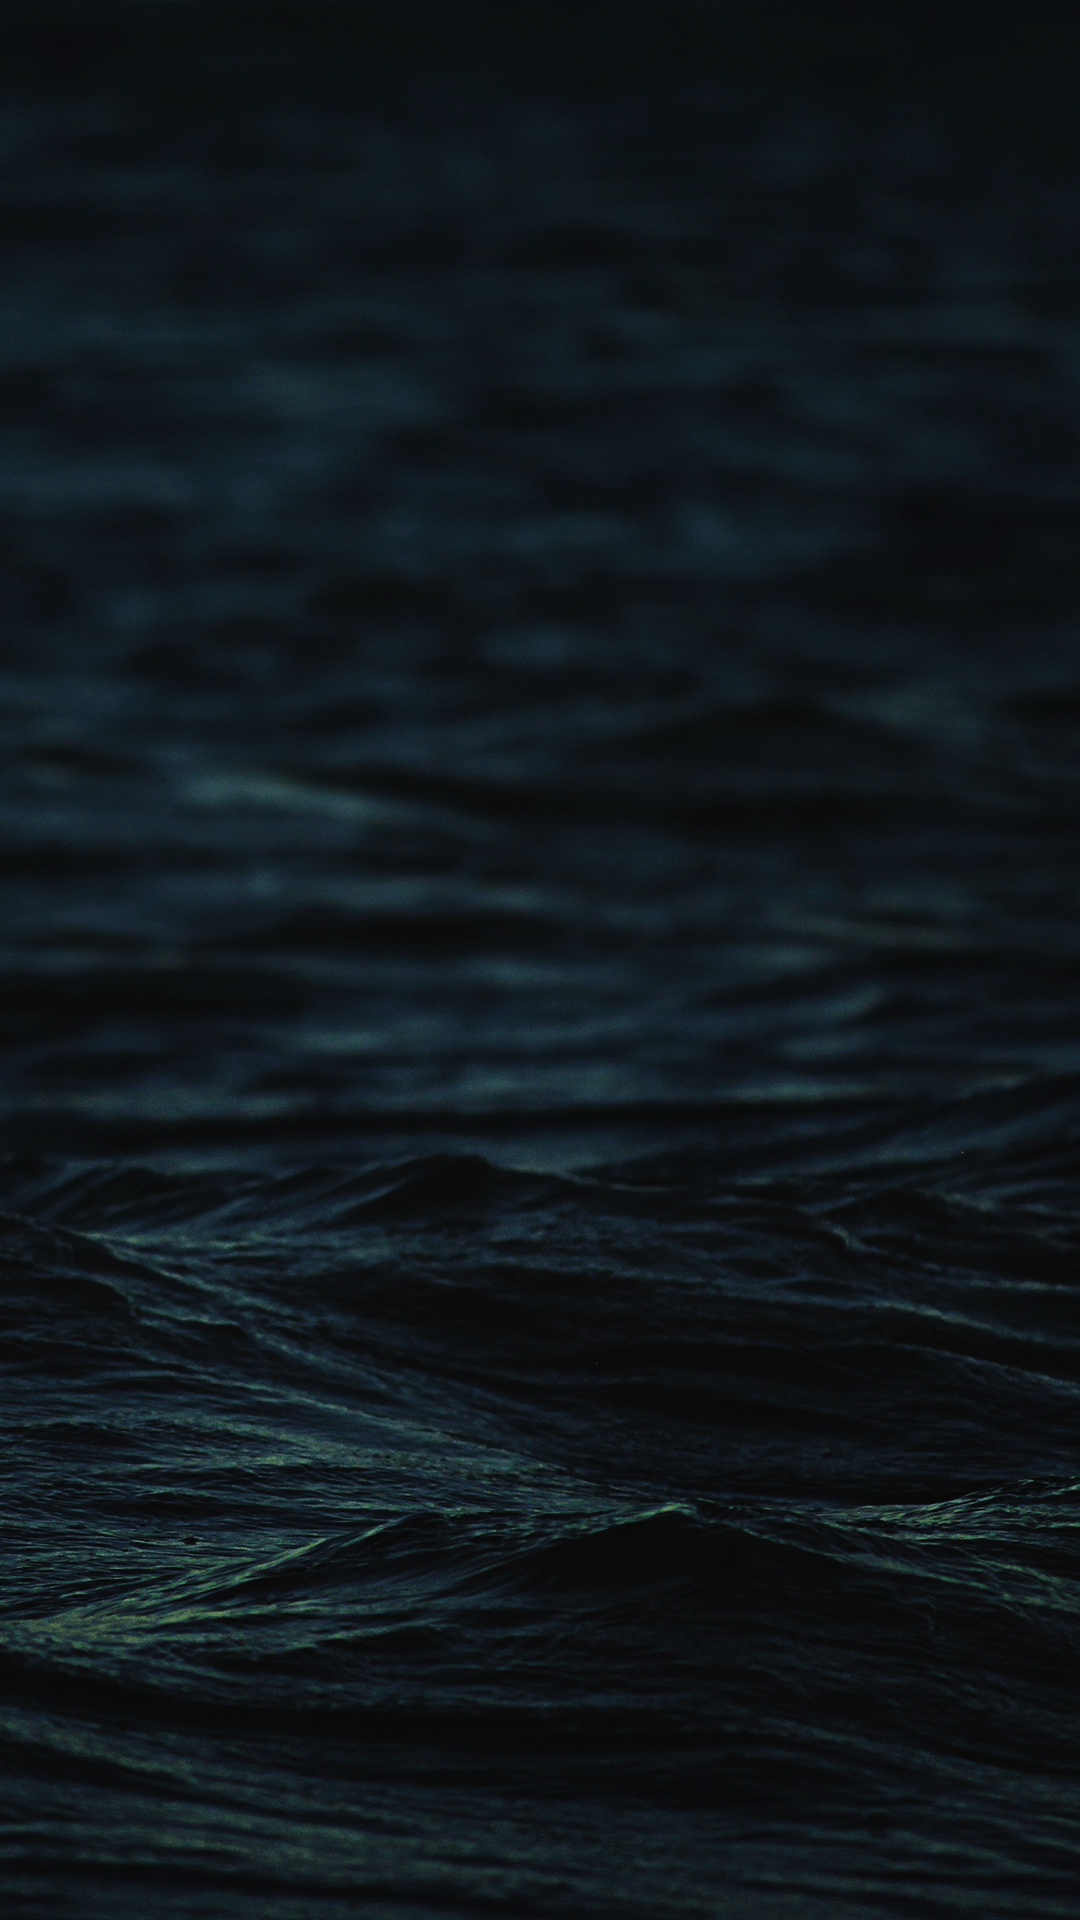 Wallpaper Hd For Water Mobile